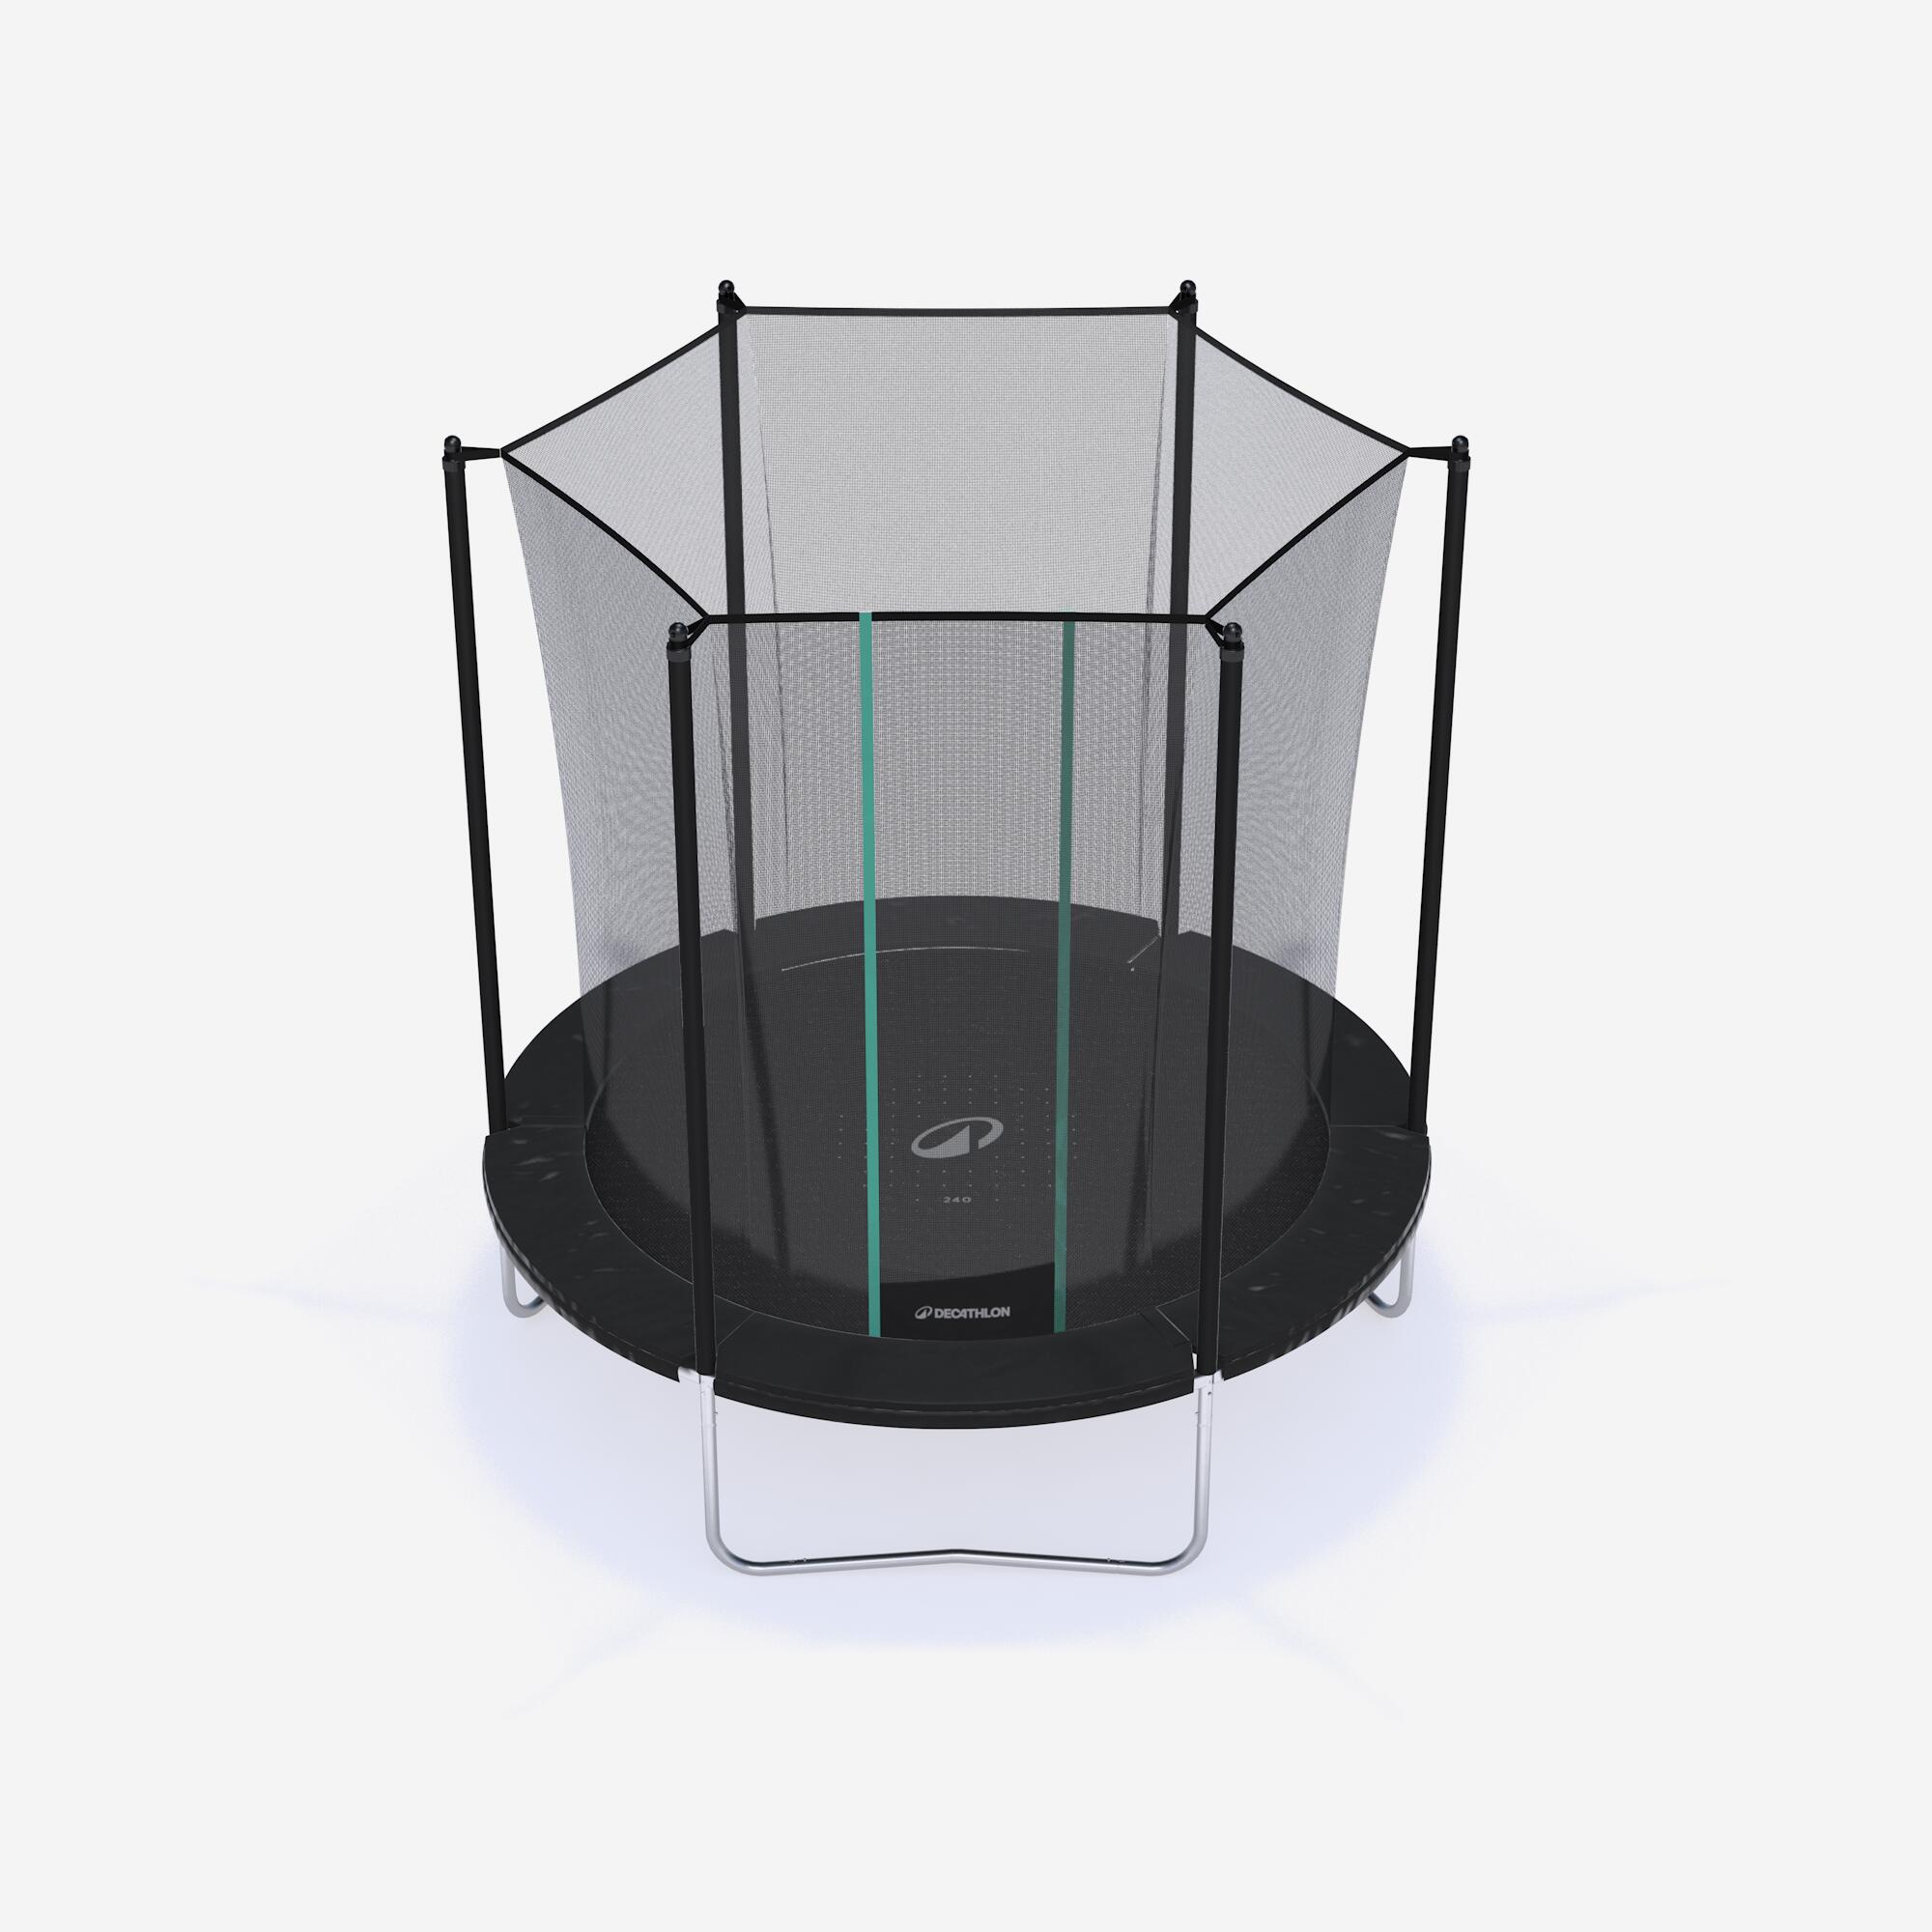 DOMYOS Trampoline 240 with Netting - Tool-Free Design